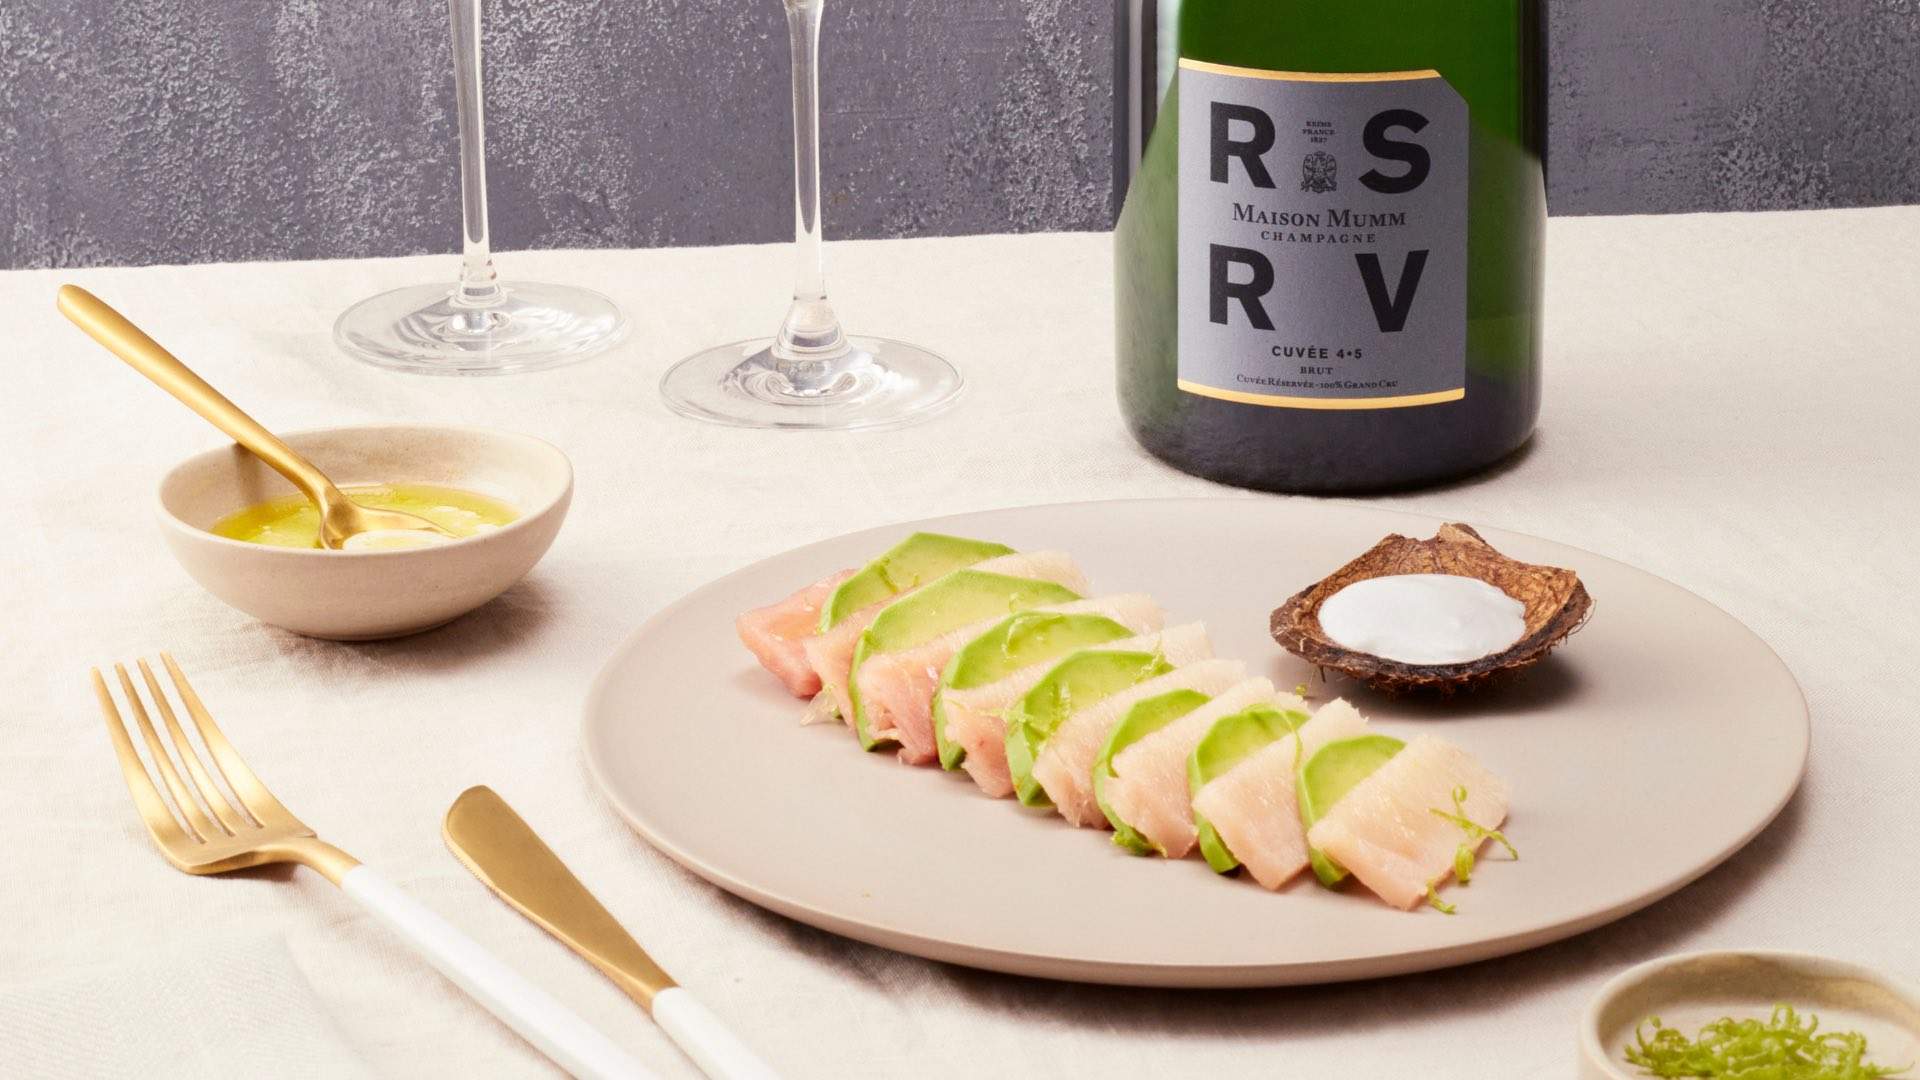 A bottle of Maison Mumm's RSRV wine and an entree on a table.